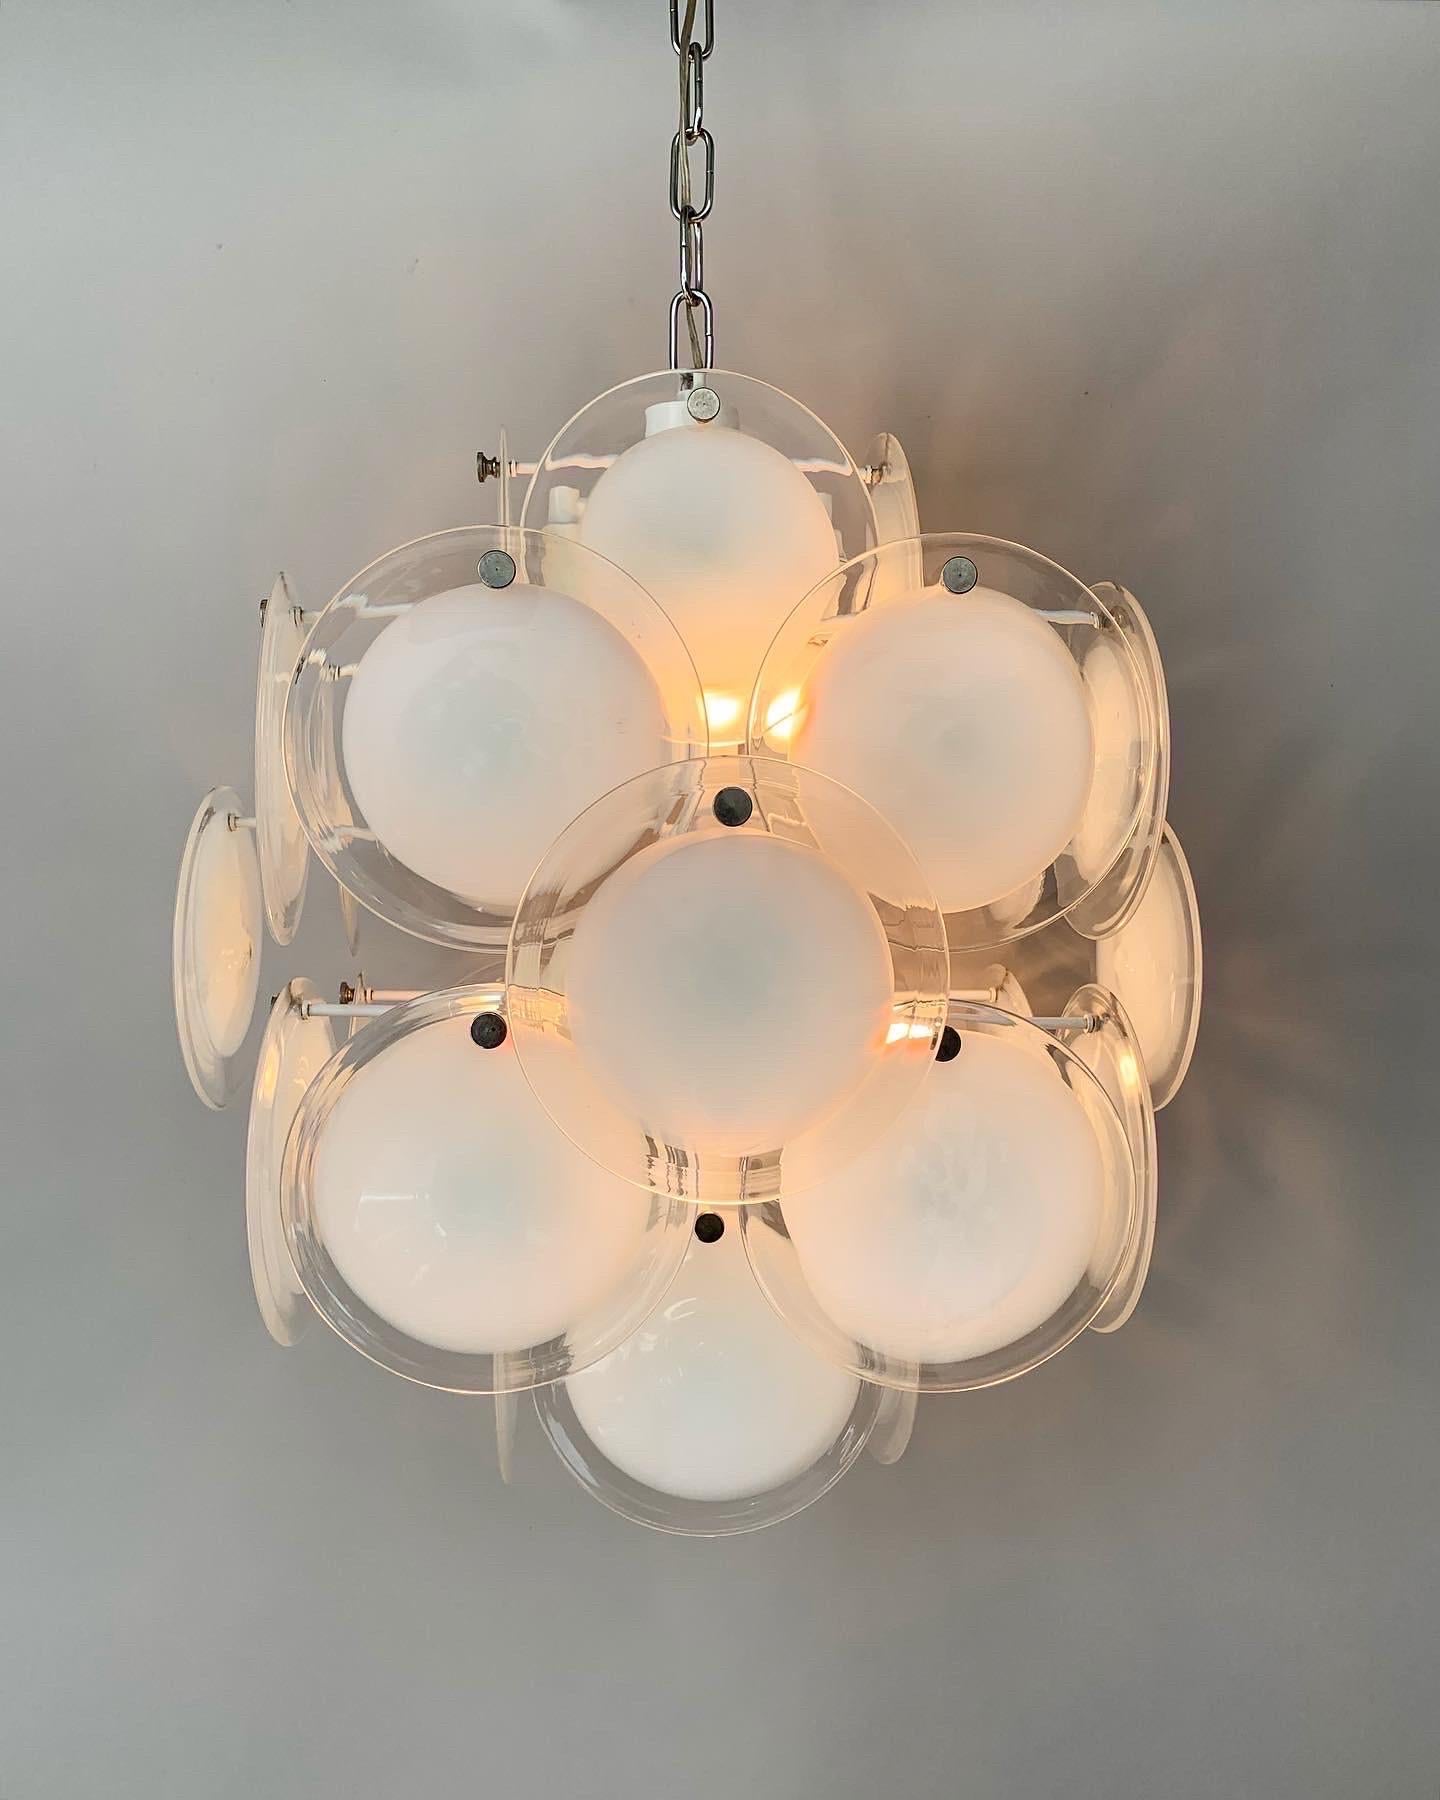 talian Murano glass disc chandelier, made in Italy in the 1970s.

These chandeliers are usually attributed to Vistosi, but were actually produced by many different manufacturers in Italy, mostly by Mazzega.

White lacquered construction with